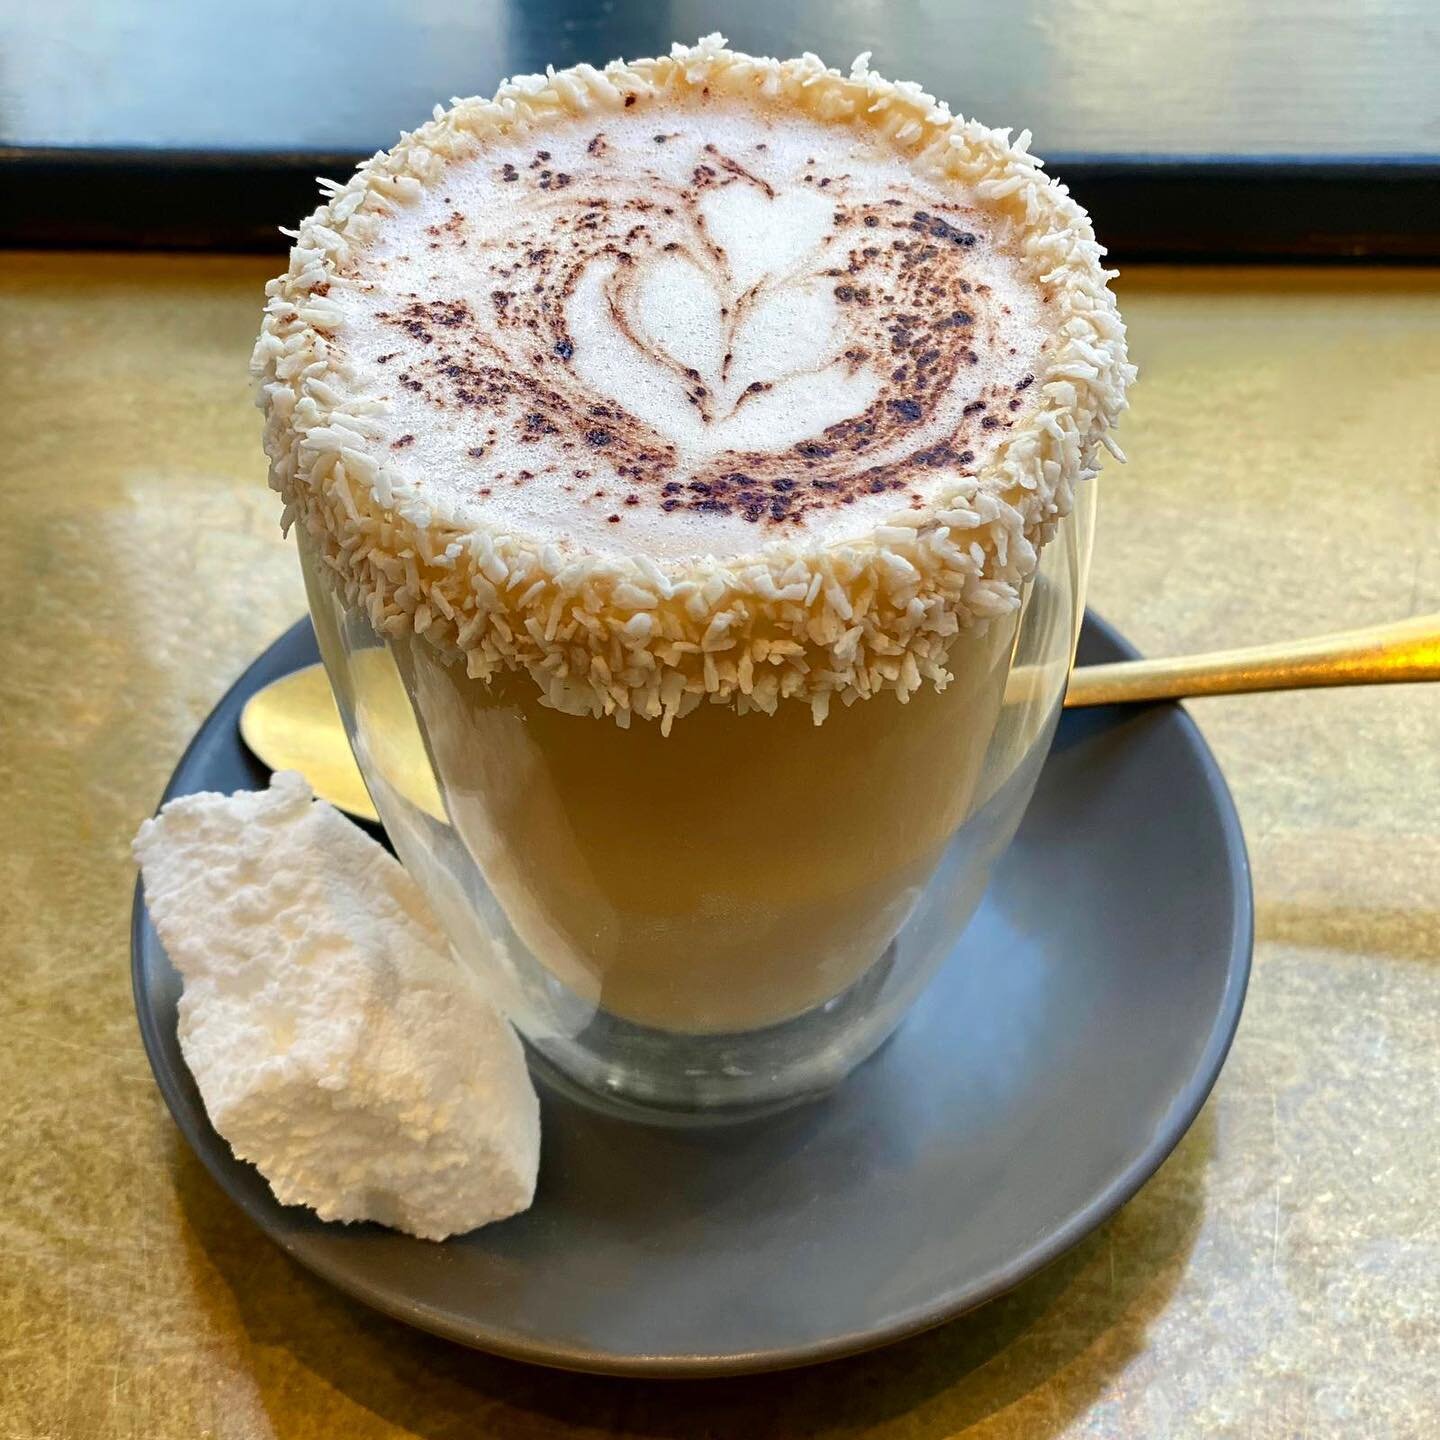 Looks like our new limited edition hot chocolate has landed in the nick of time - our Raffaello Hot Chocolate is new for the autumn and just the thing to keep you cosy on a rainy day like this!

It's creamy 33% Ivory Coast white chocolate, foamed Mos